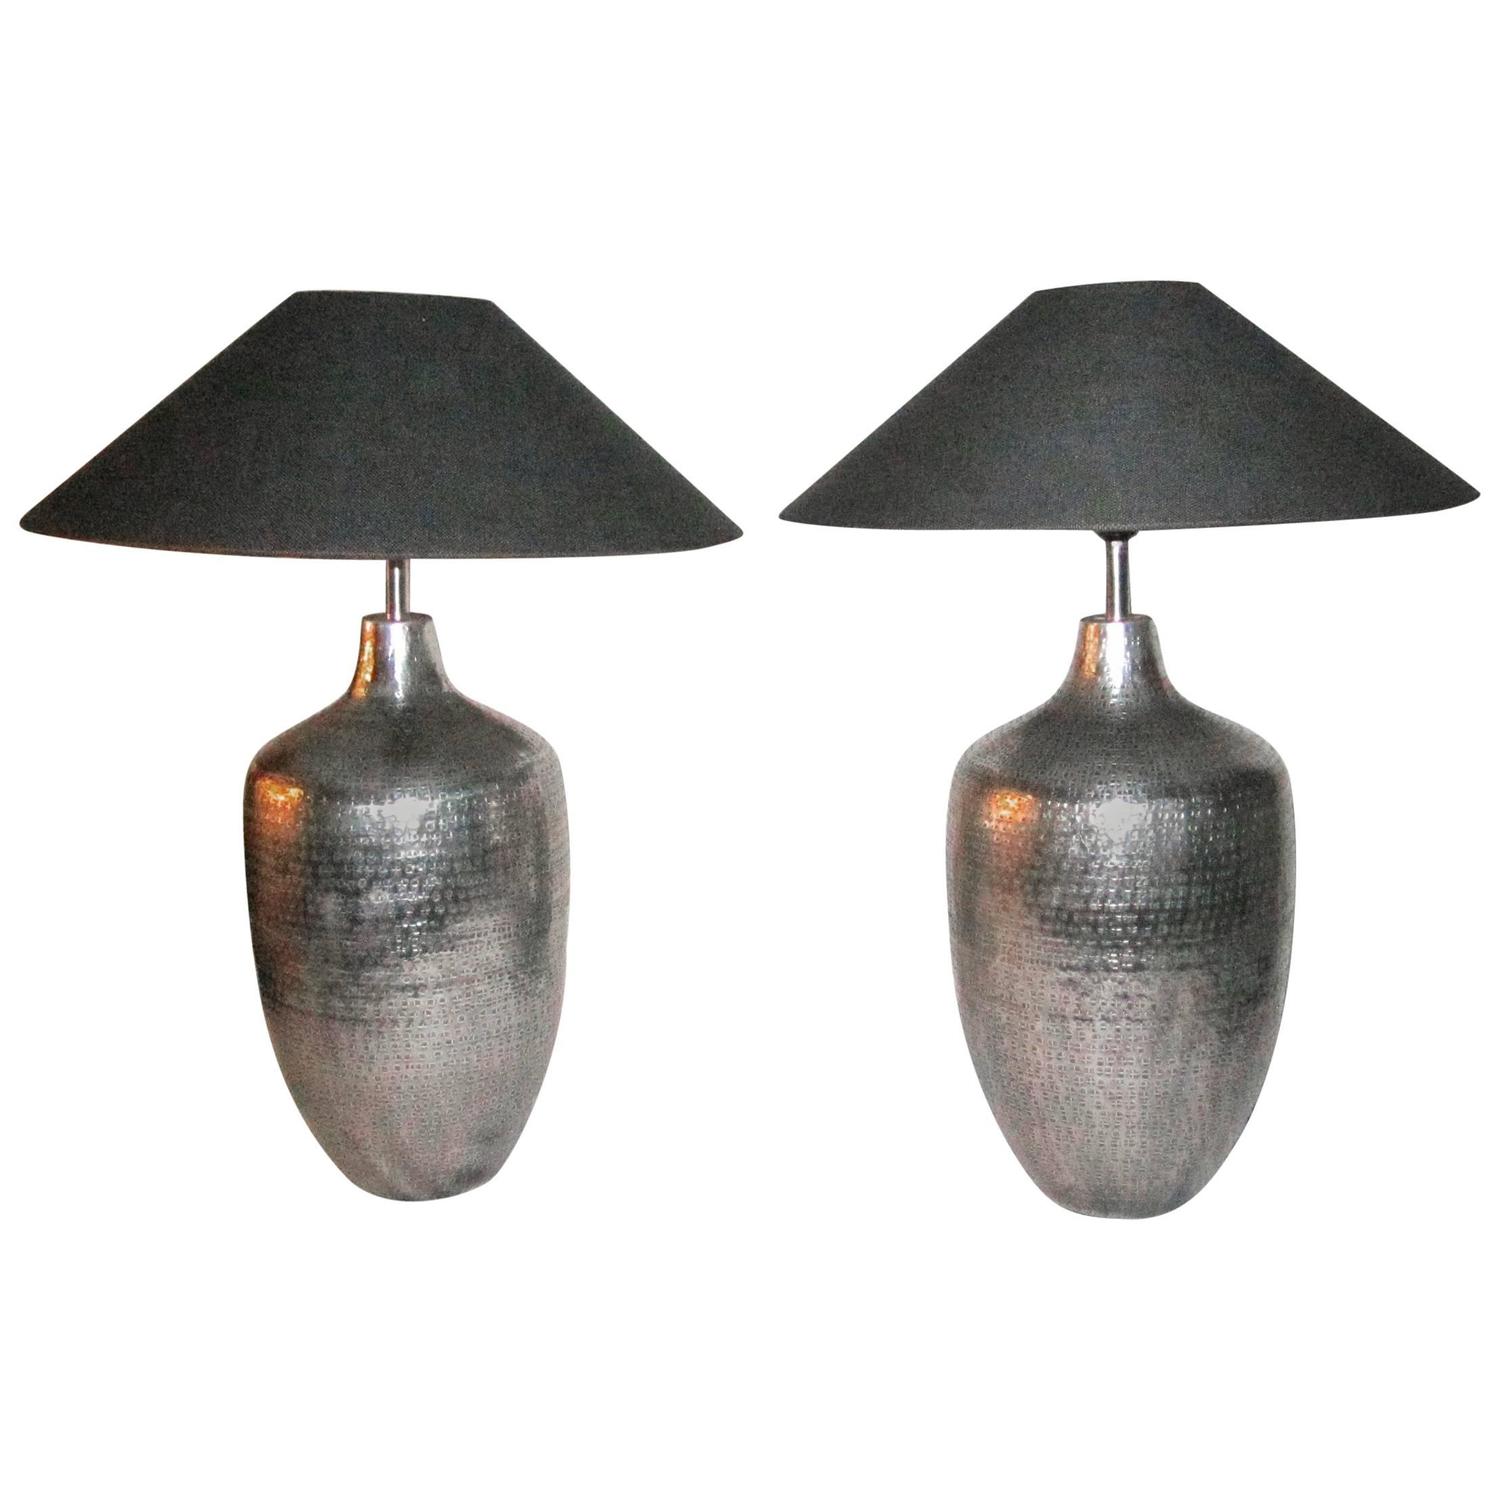 Pair of Table Lamps Silver Hammered Metal Bases, India ...